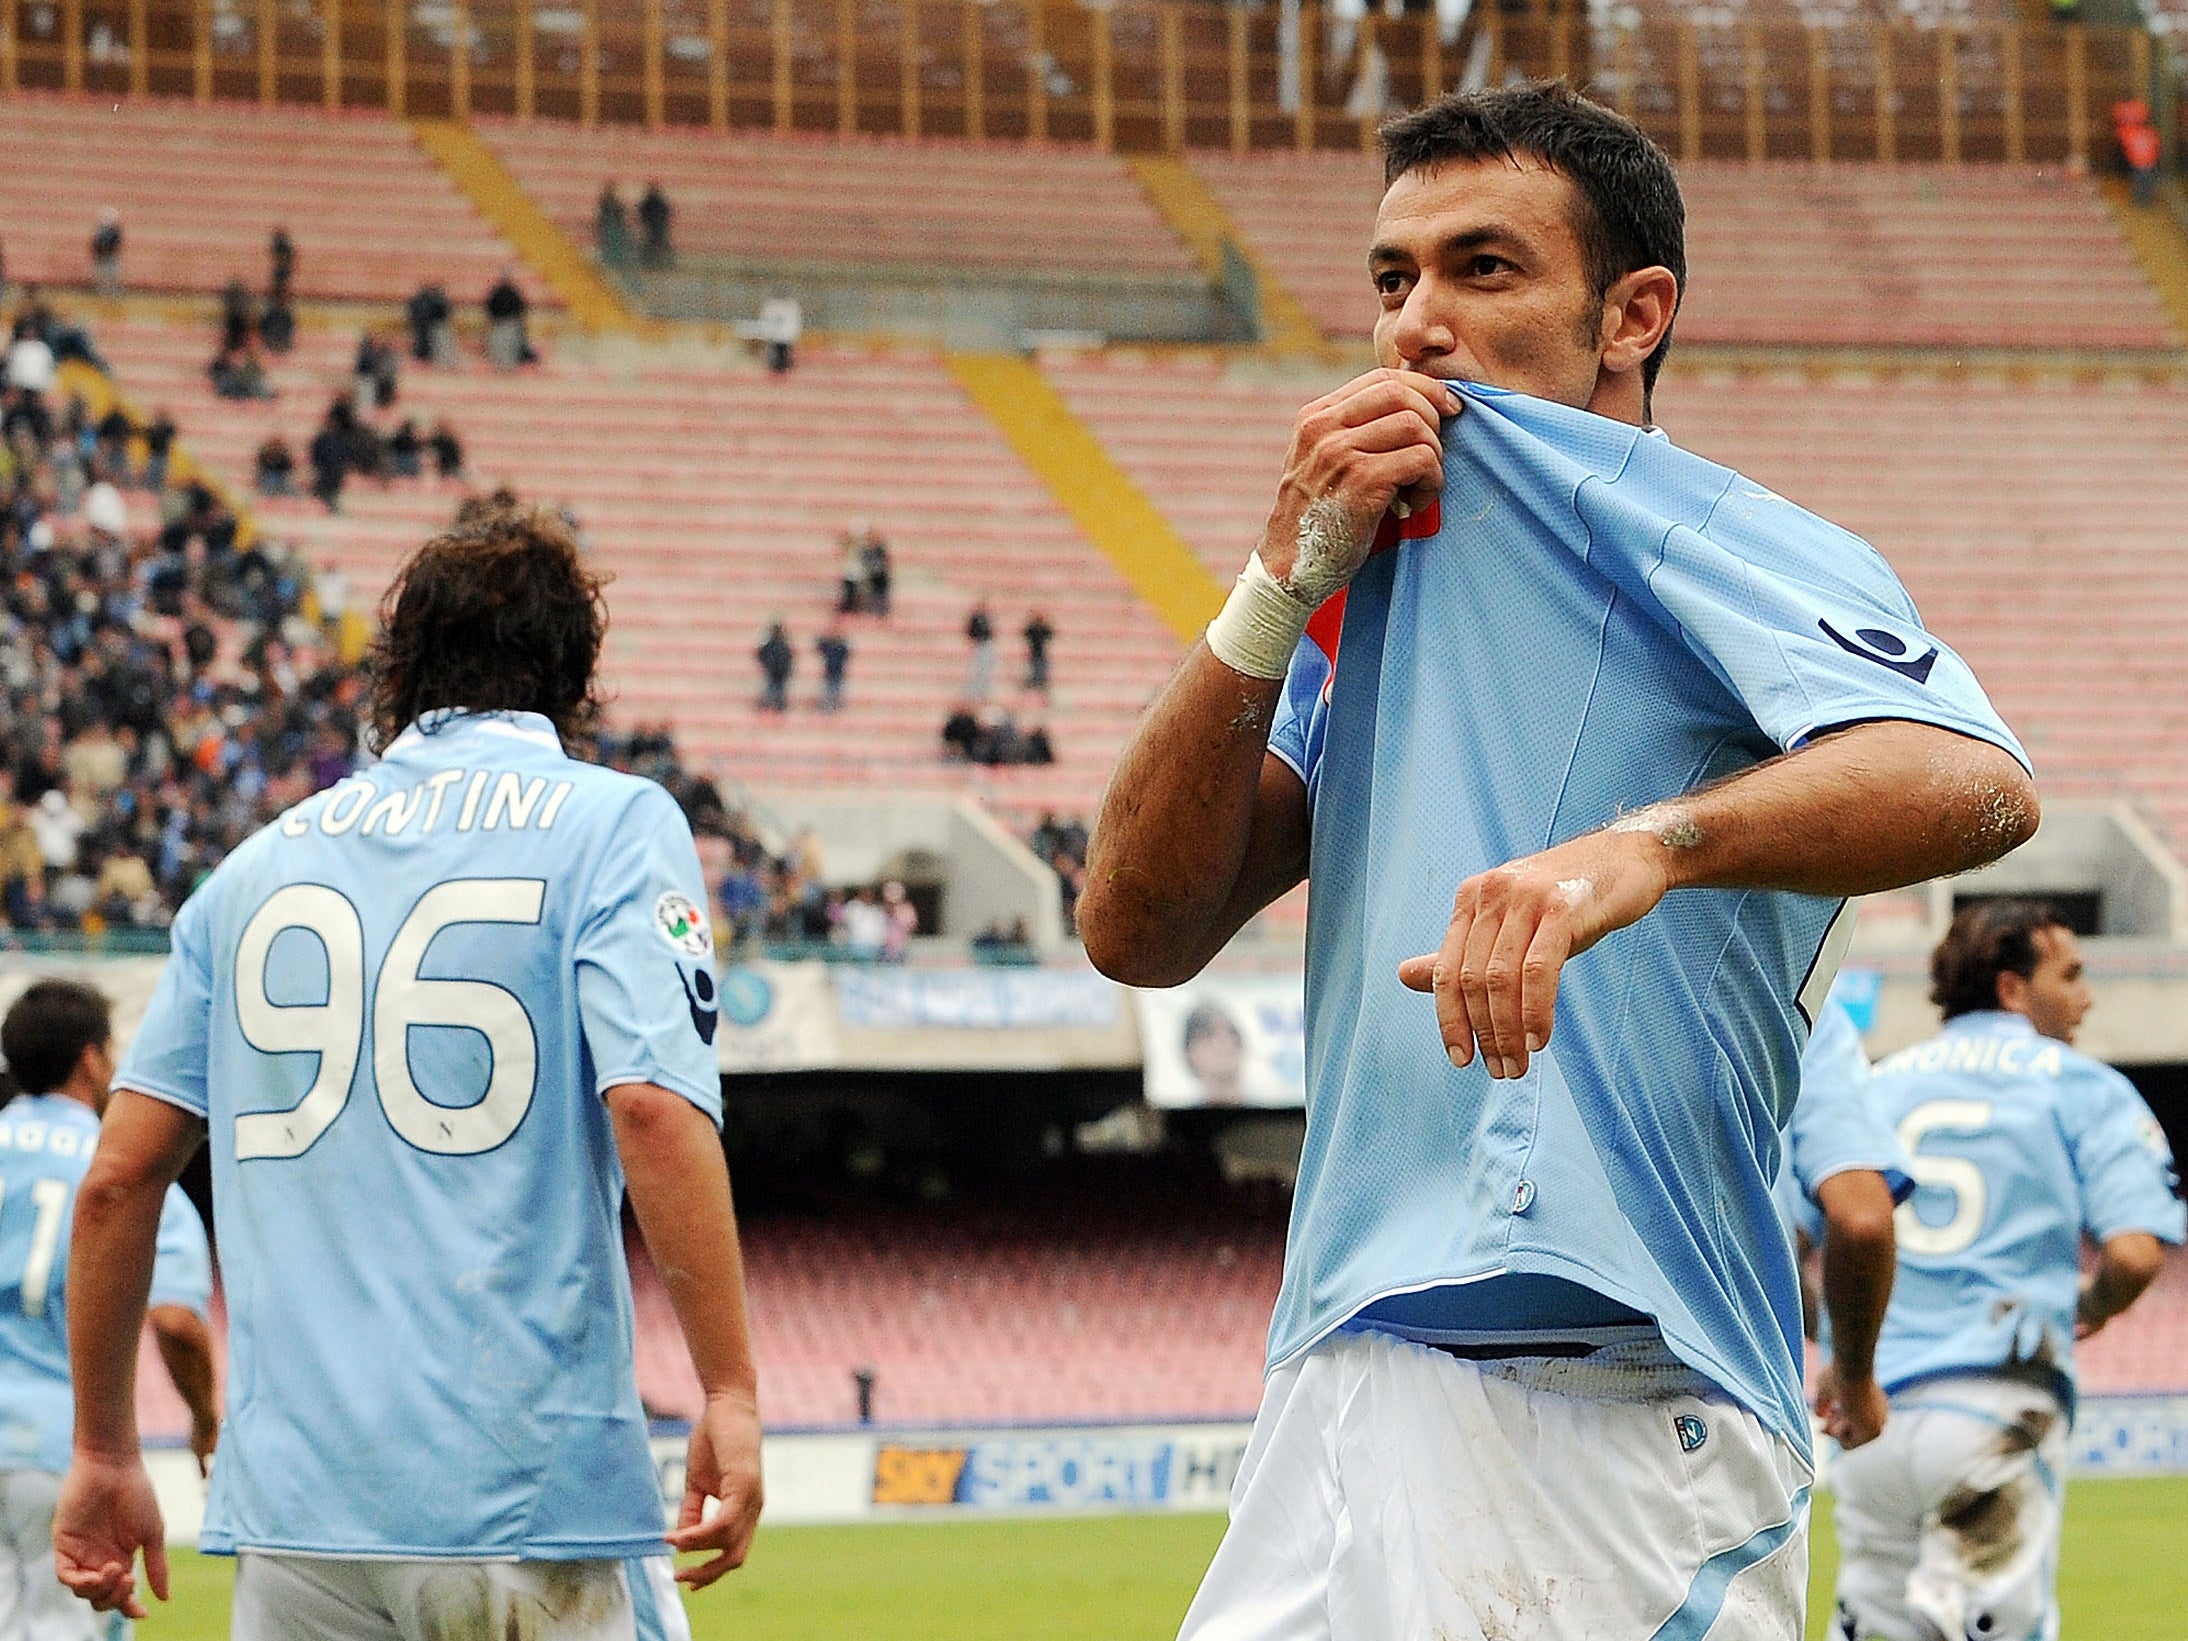 Quagliarella grew up on the outskirts of Naples and dreamed of playing for the Partinopei